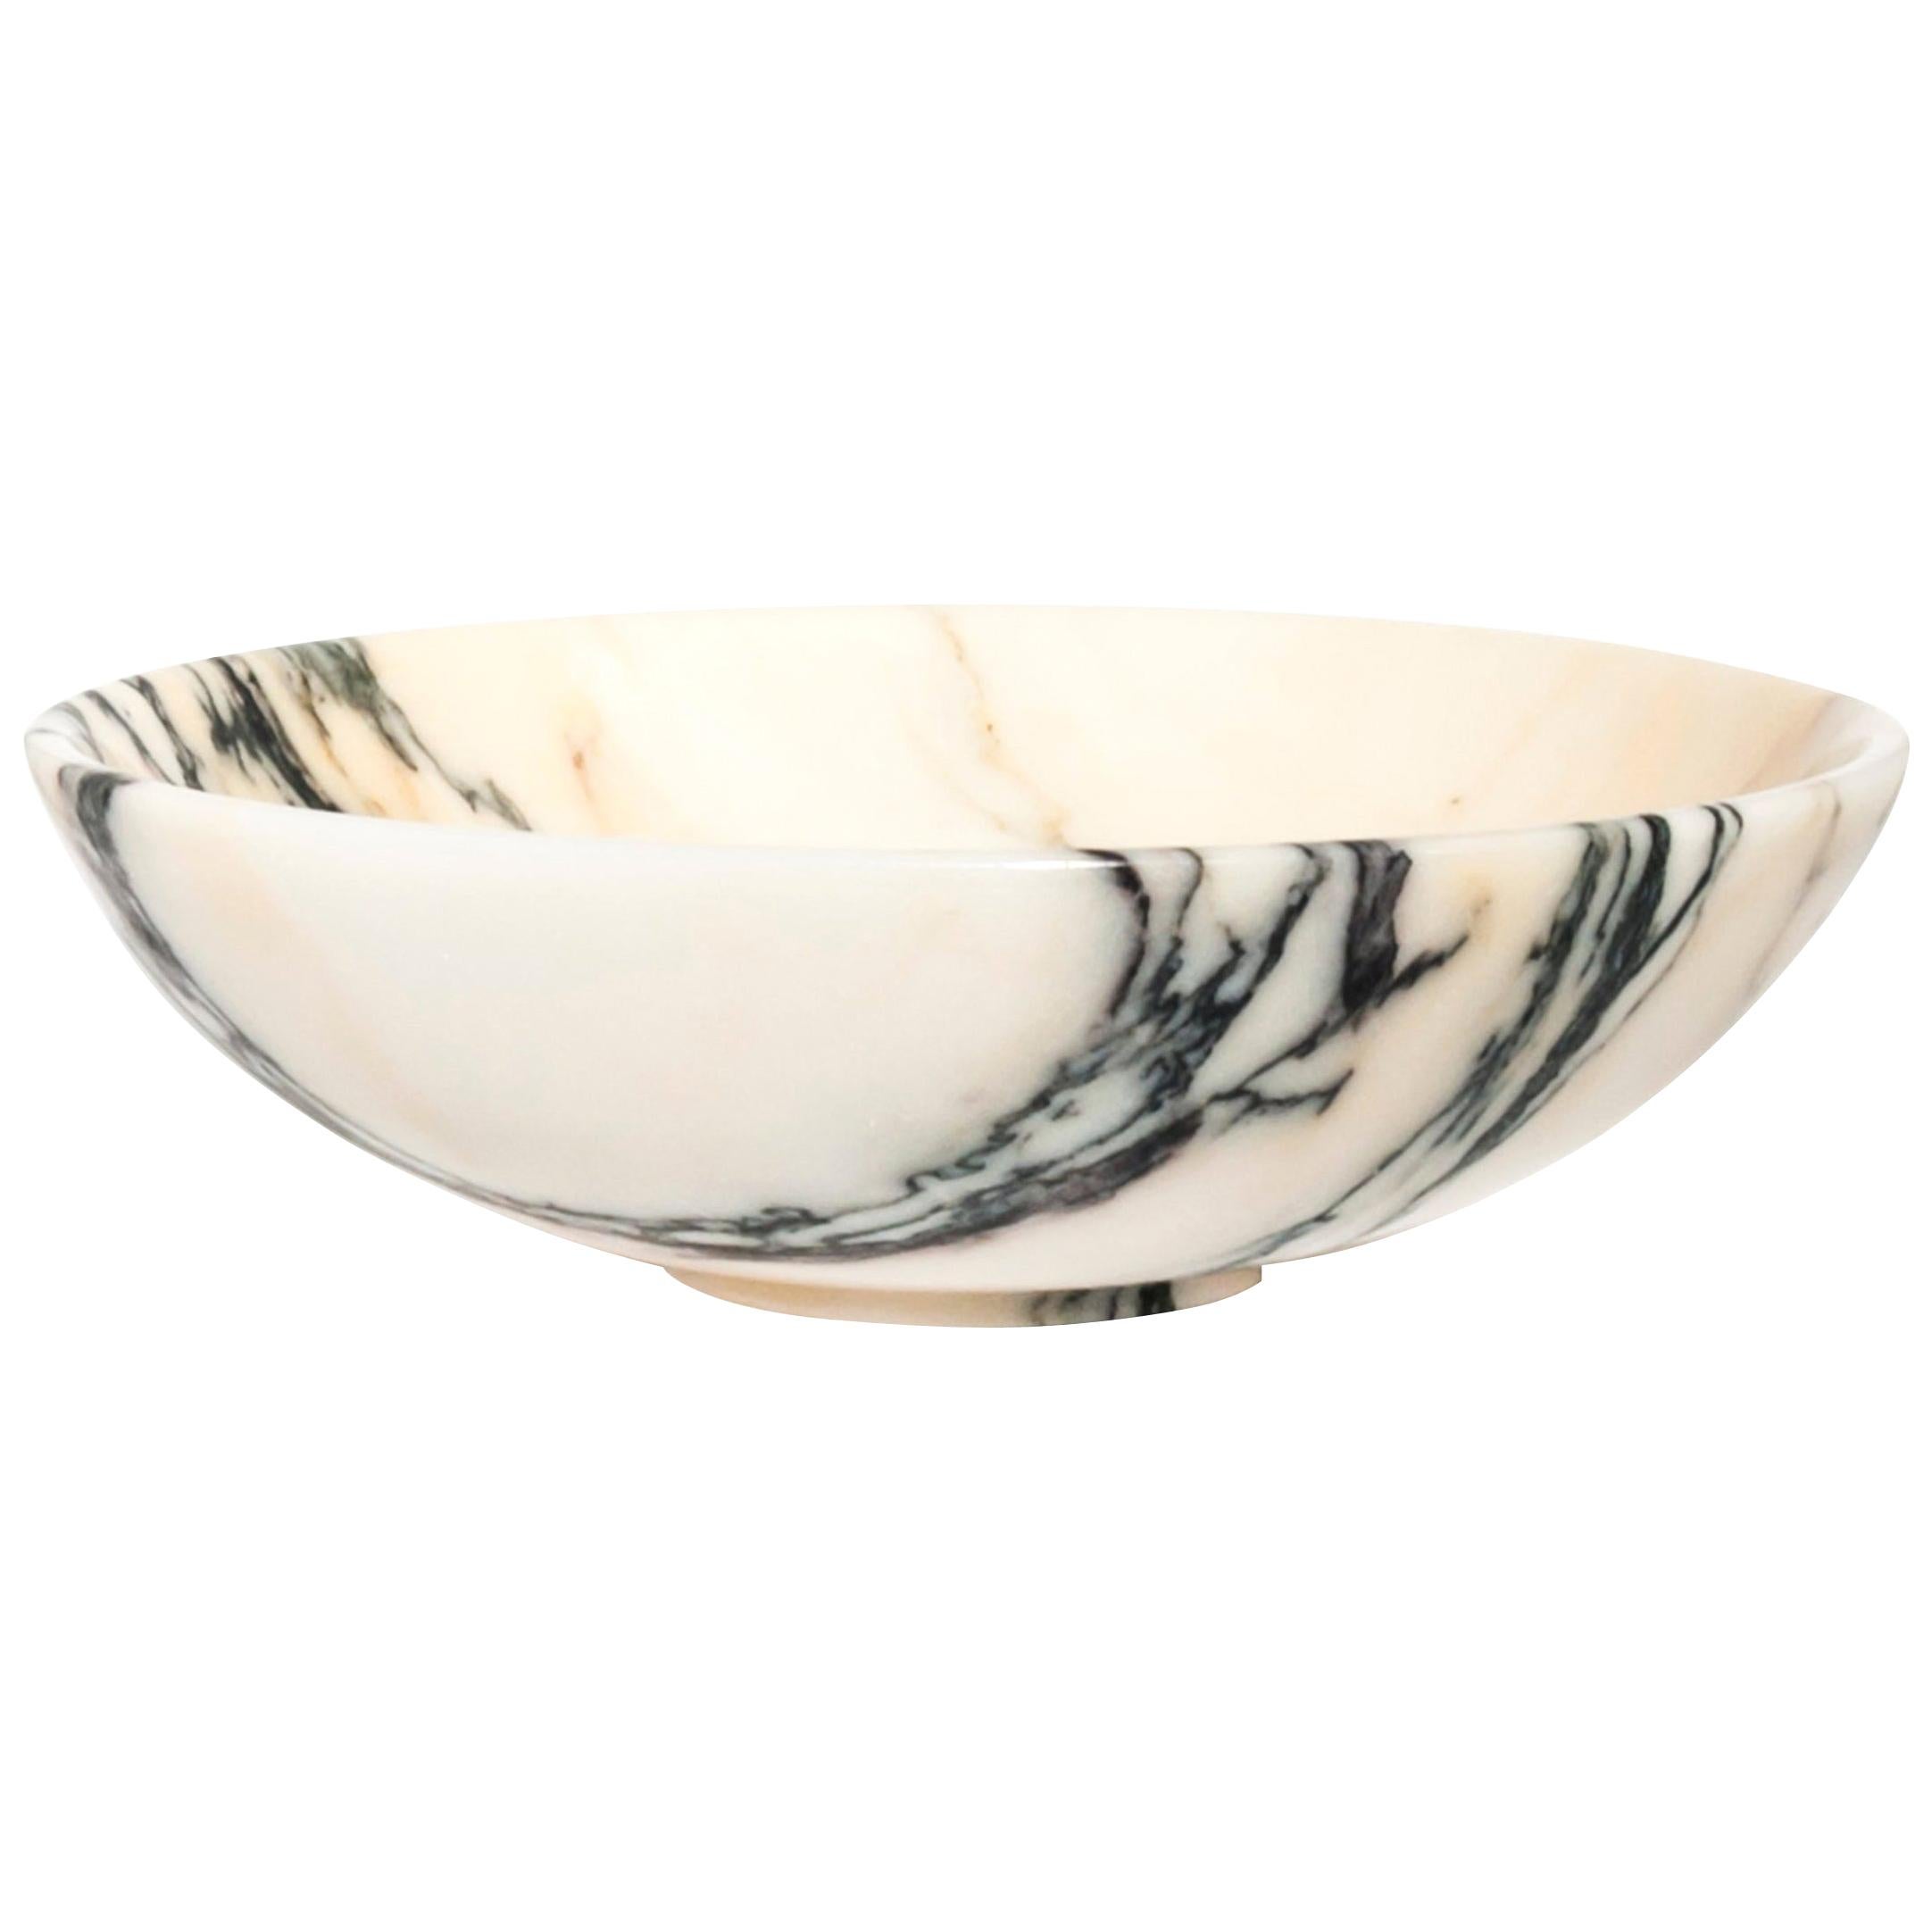 Customized Bowl in Paonazzo Marble Honed